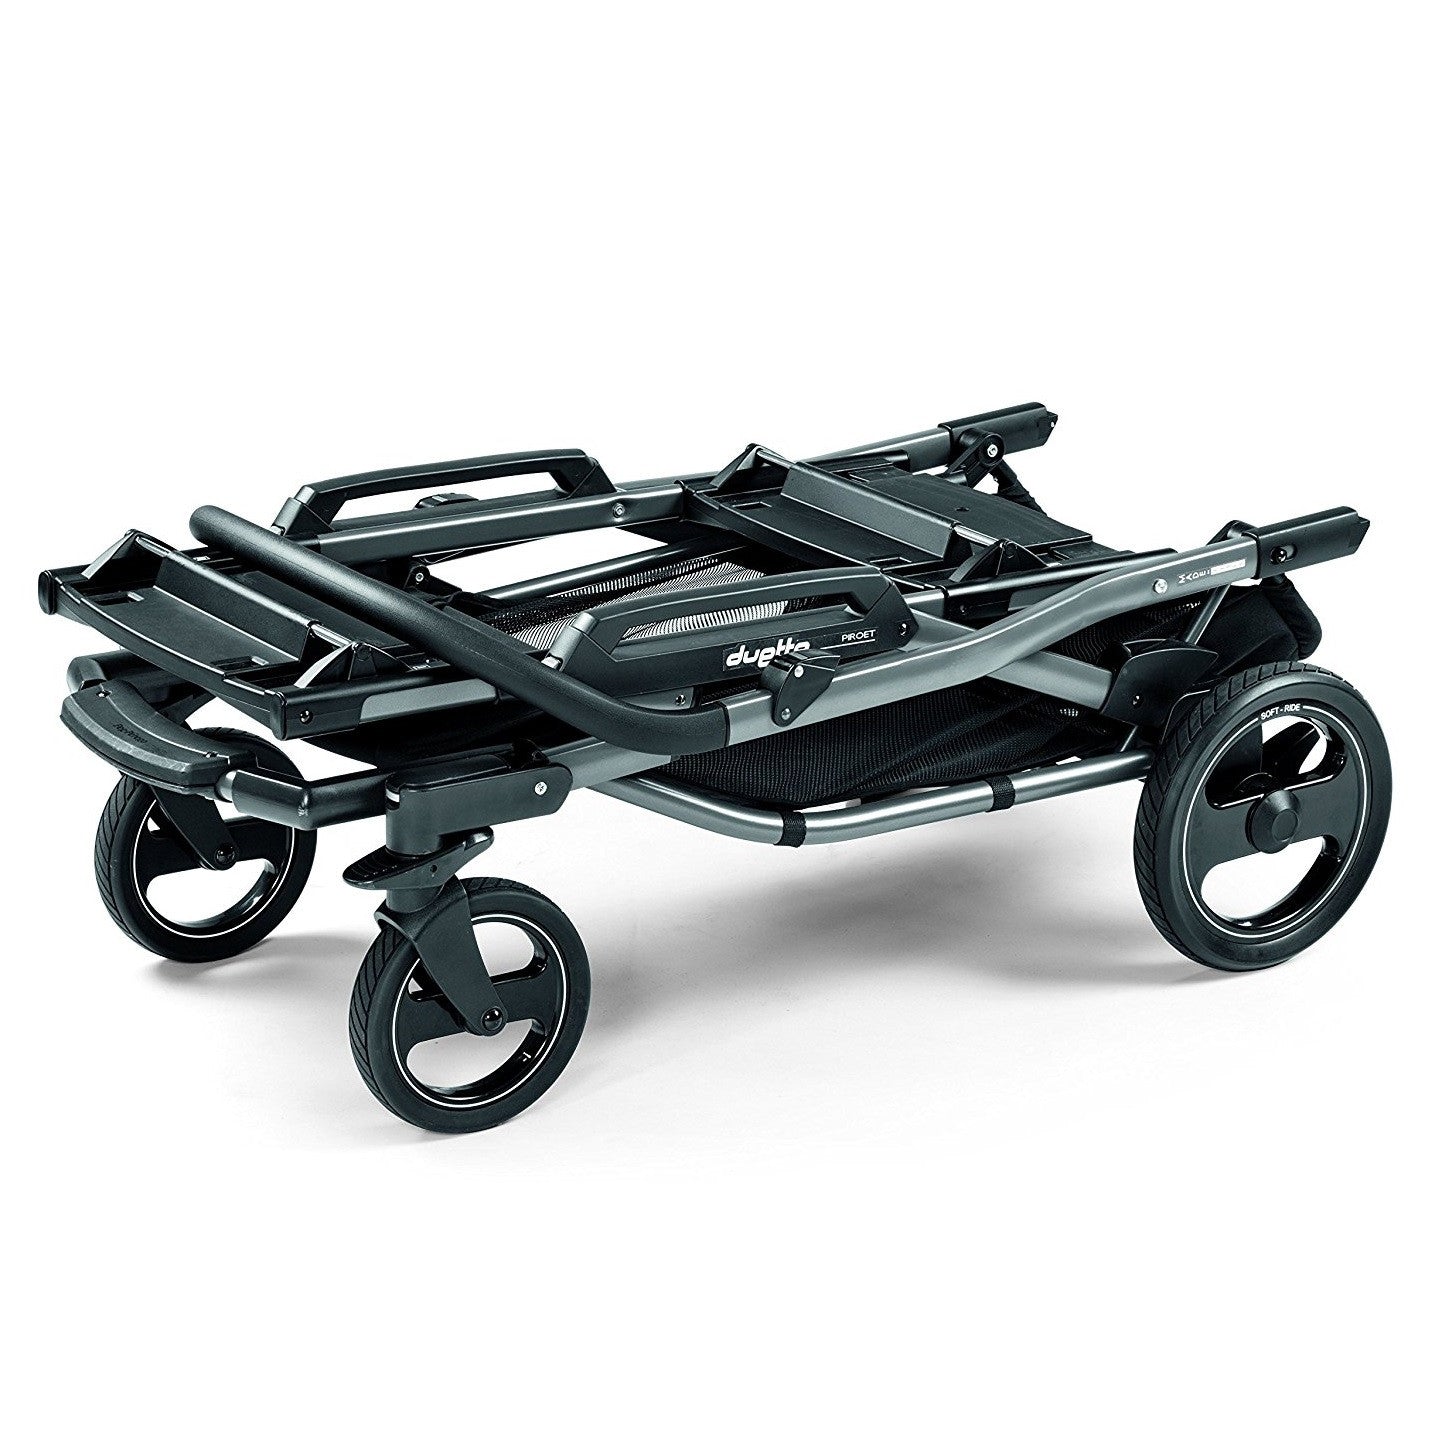 peg perego duette piroet chassis